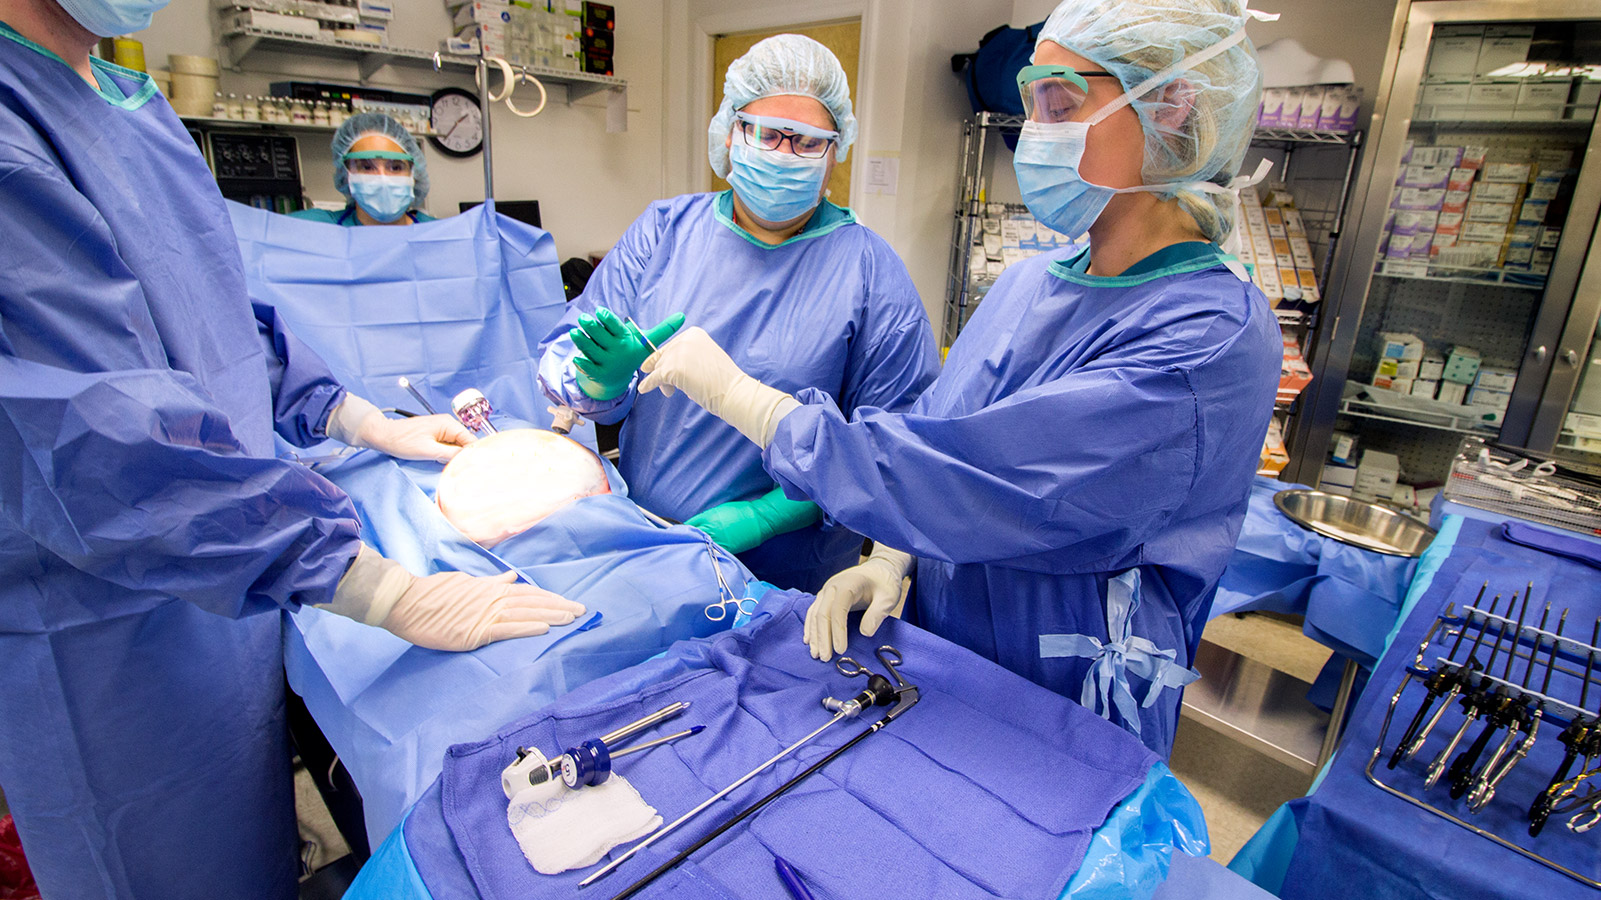 Surgical Technician students practice performing surgery together in mock operation room